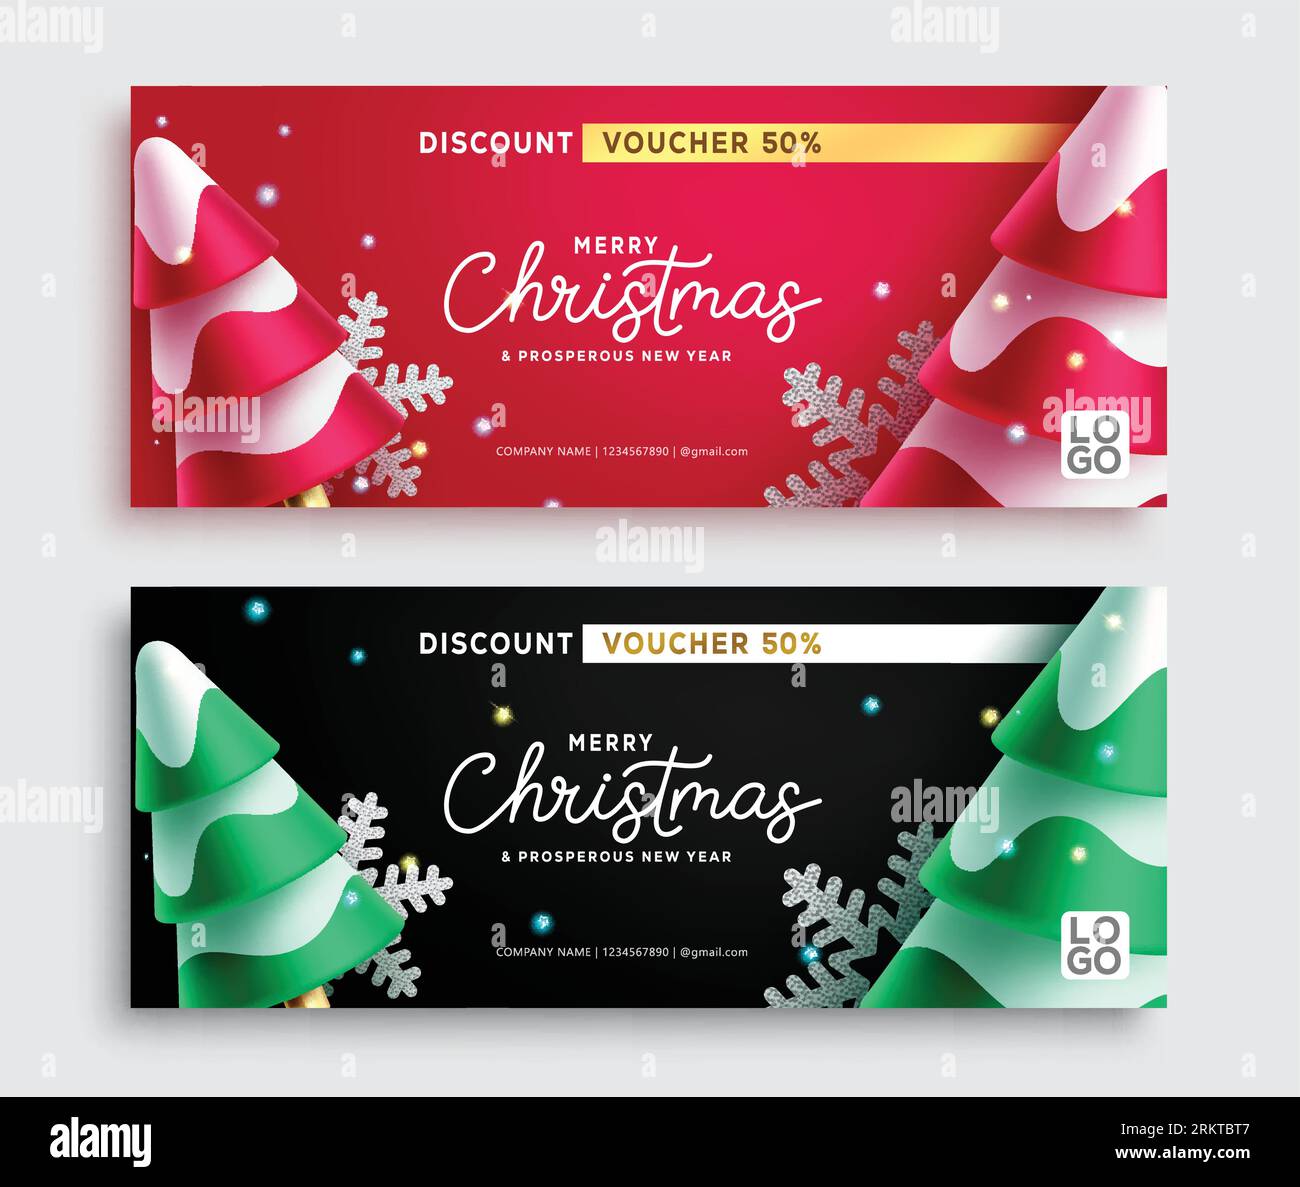 Merry christmas sale text vector set design. Christmas voucher discount for company gift certificate lay out collection. Vector illustration holiday Stock Vector